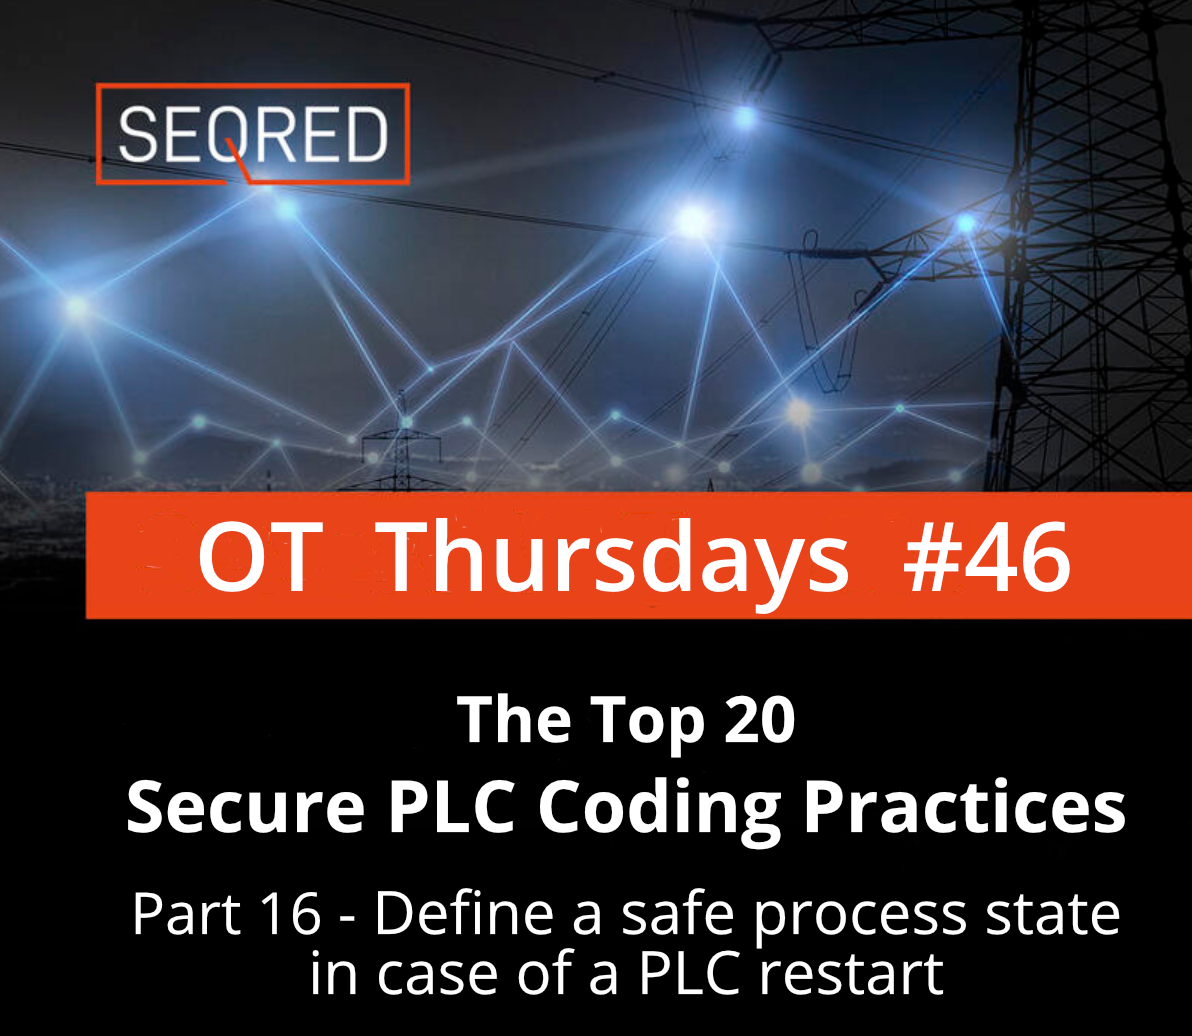 The Top 20 Secure PLC Coding Practices. Define a safe process state in case of a PLC restart